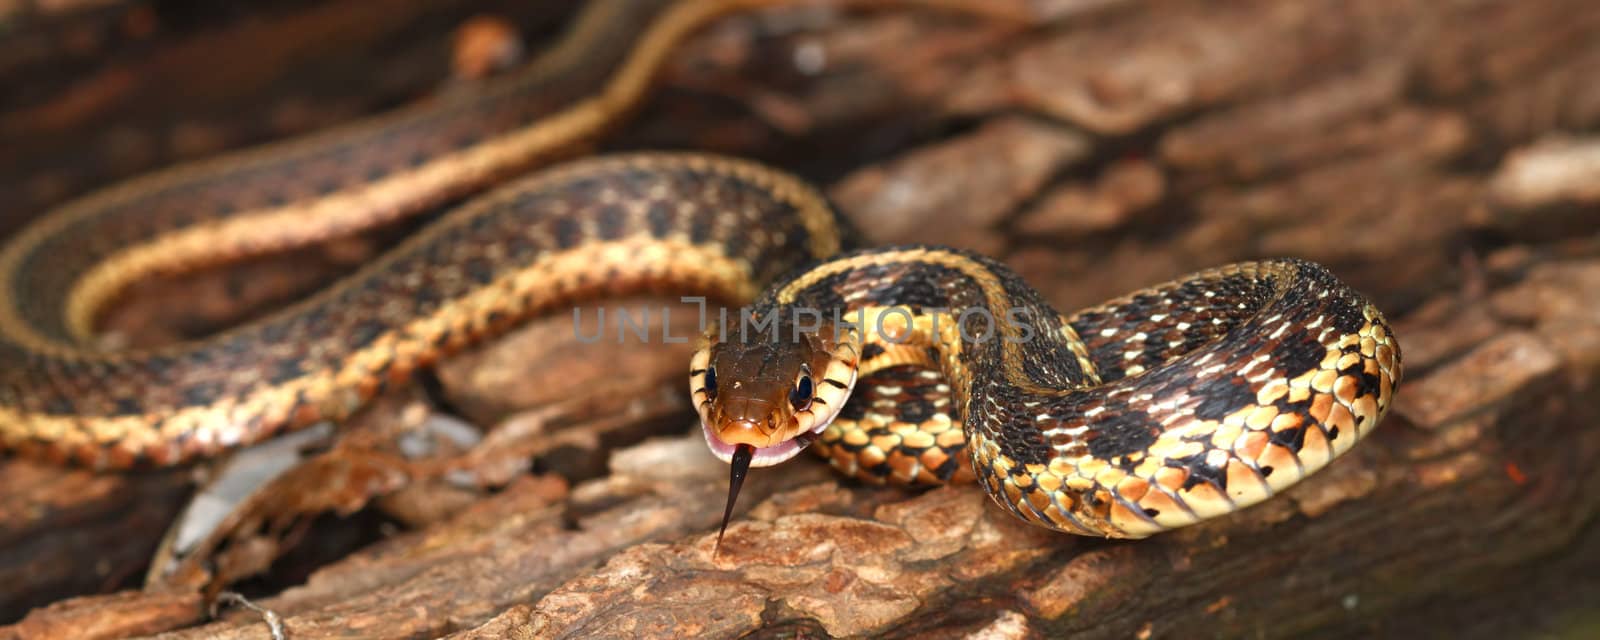 Garter Snake (Thamnophis sirtalis) by Wirepec